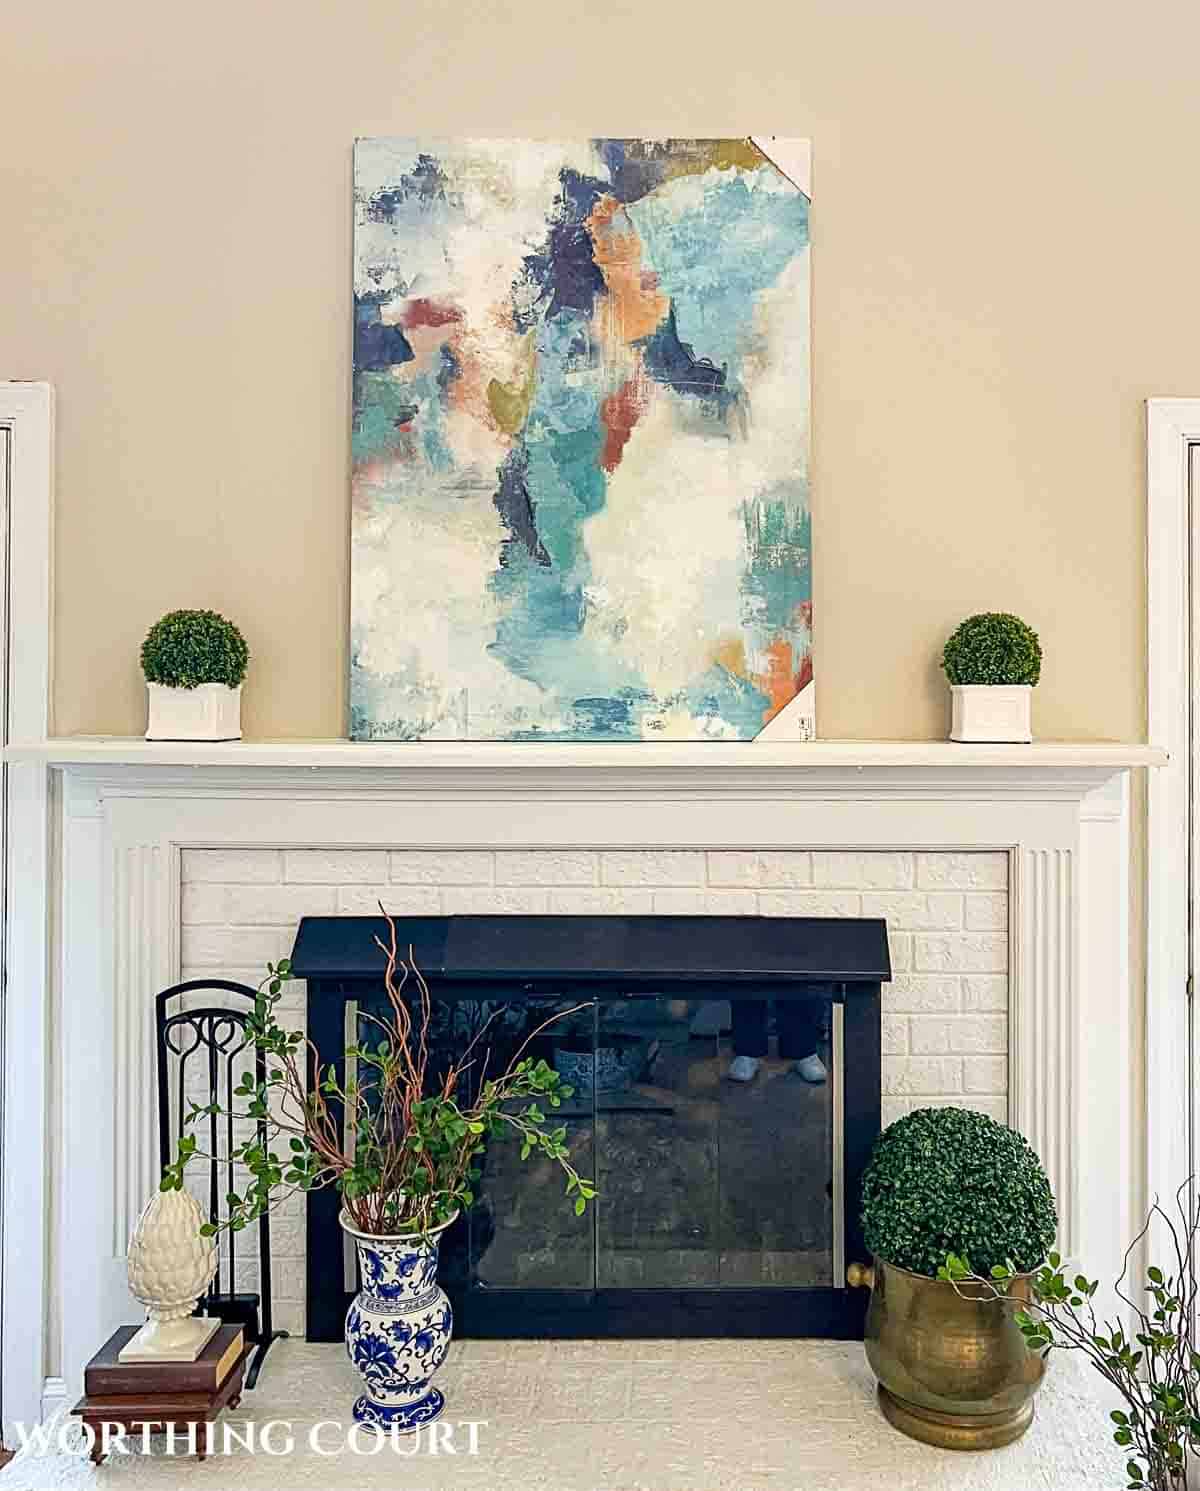 abstract canvas art sitting on the mantel above a white brick fireplace